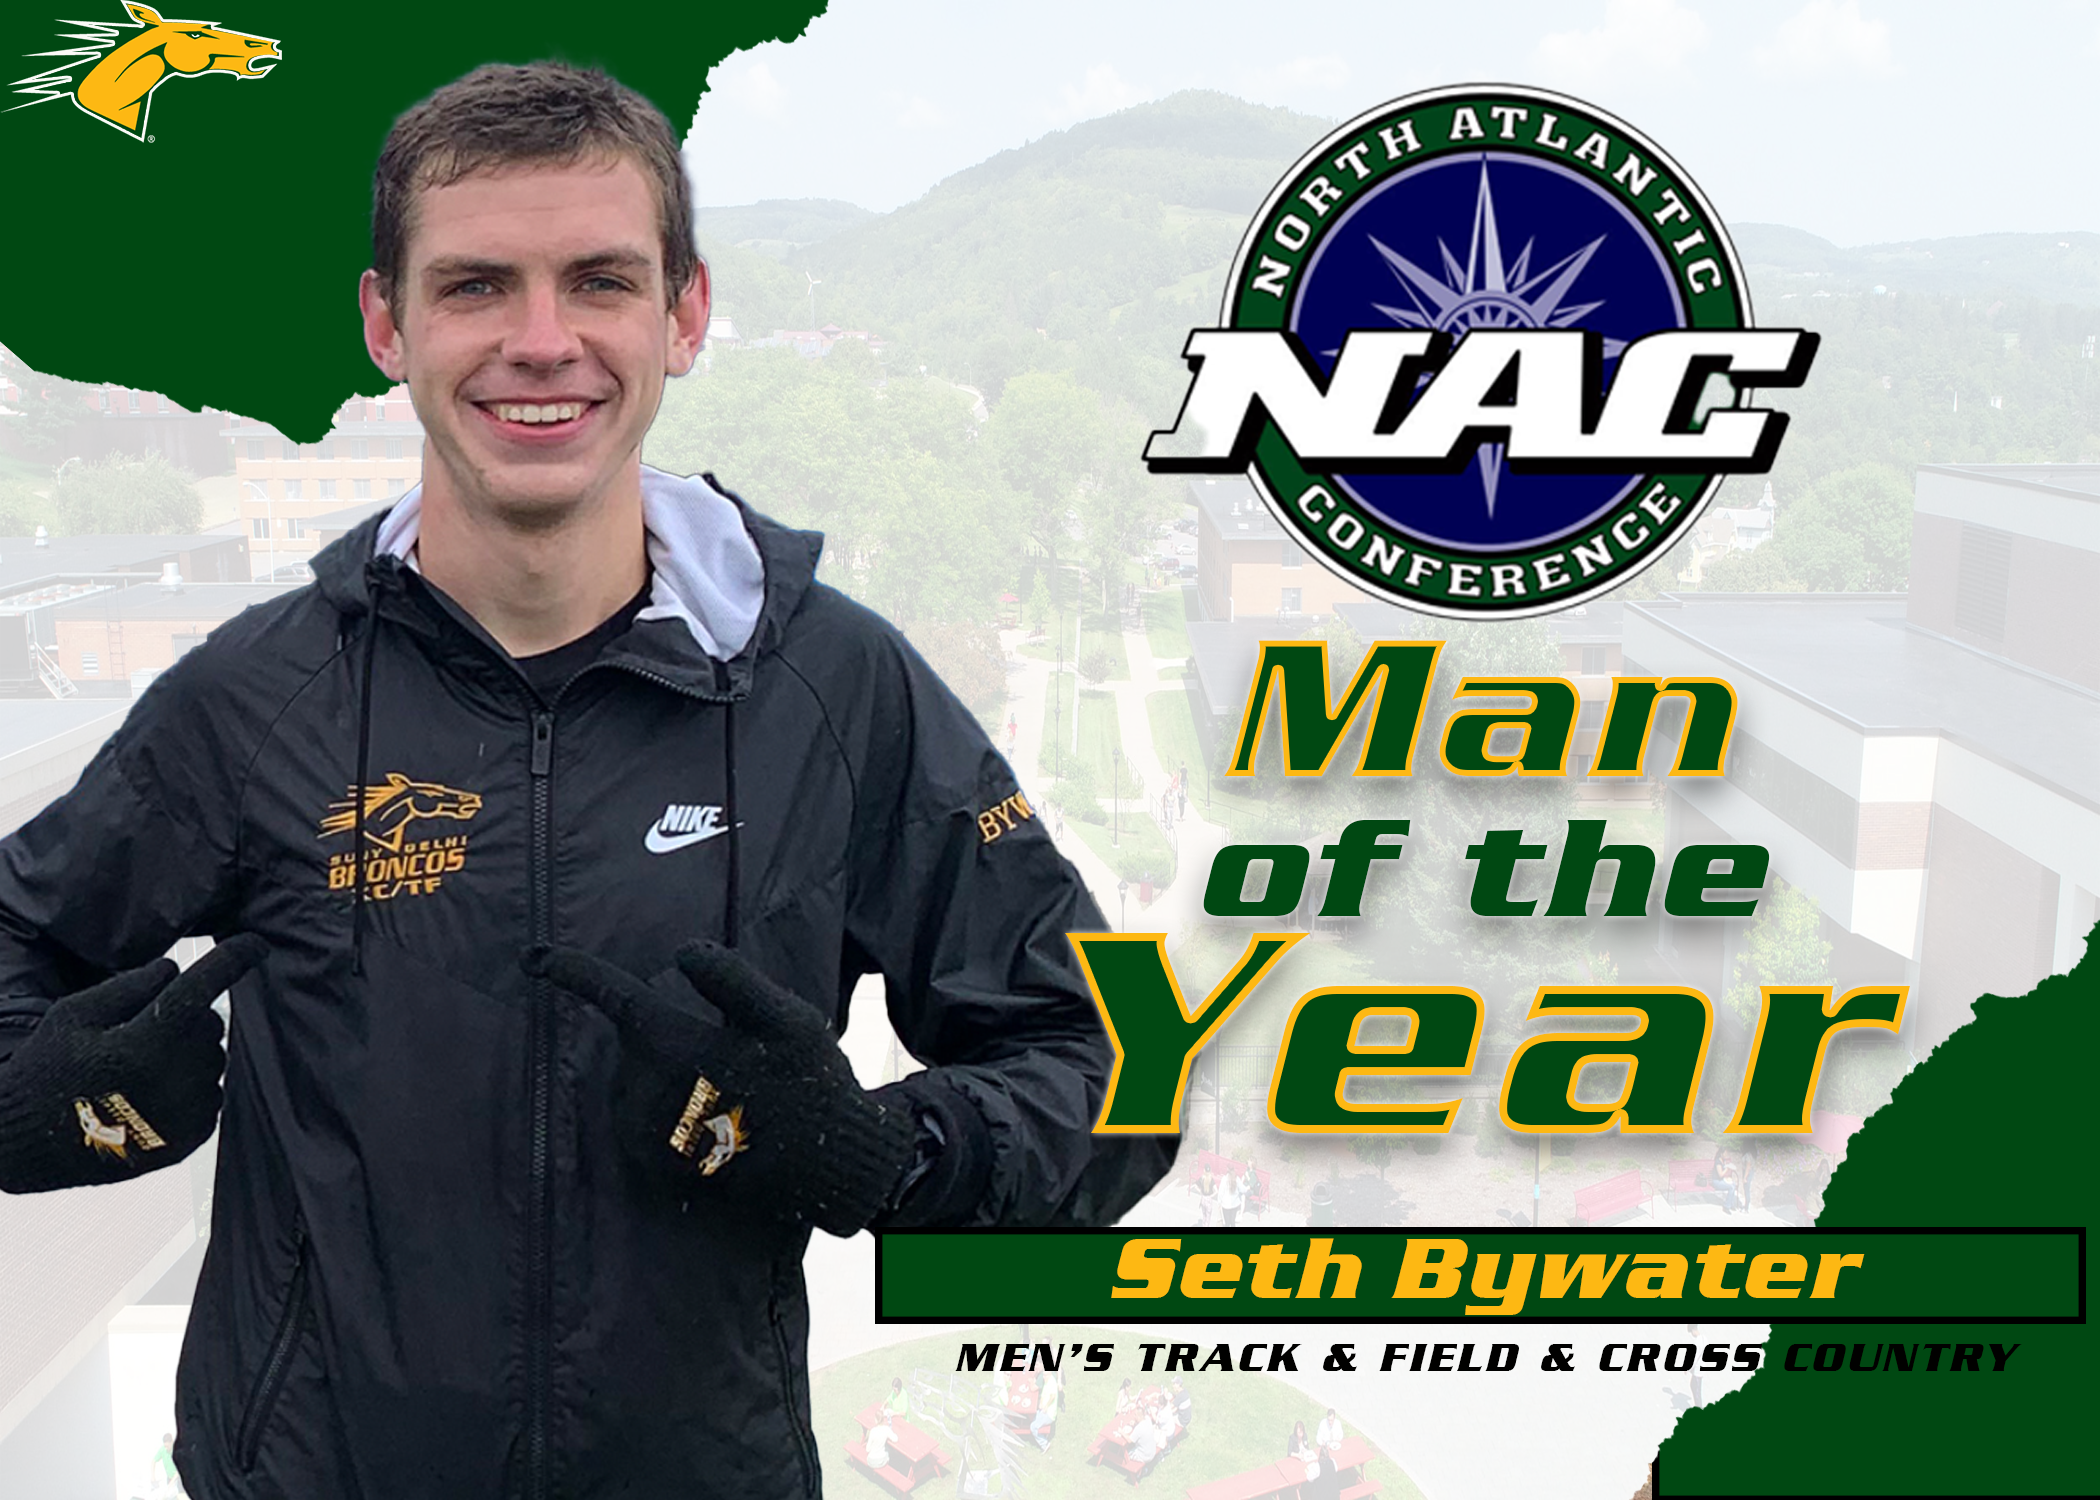 Seth Bywater named Delhi’s first ever NAC Man of the Year